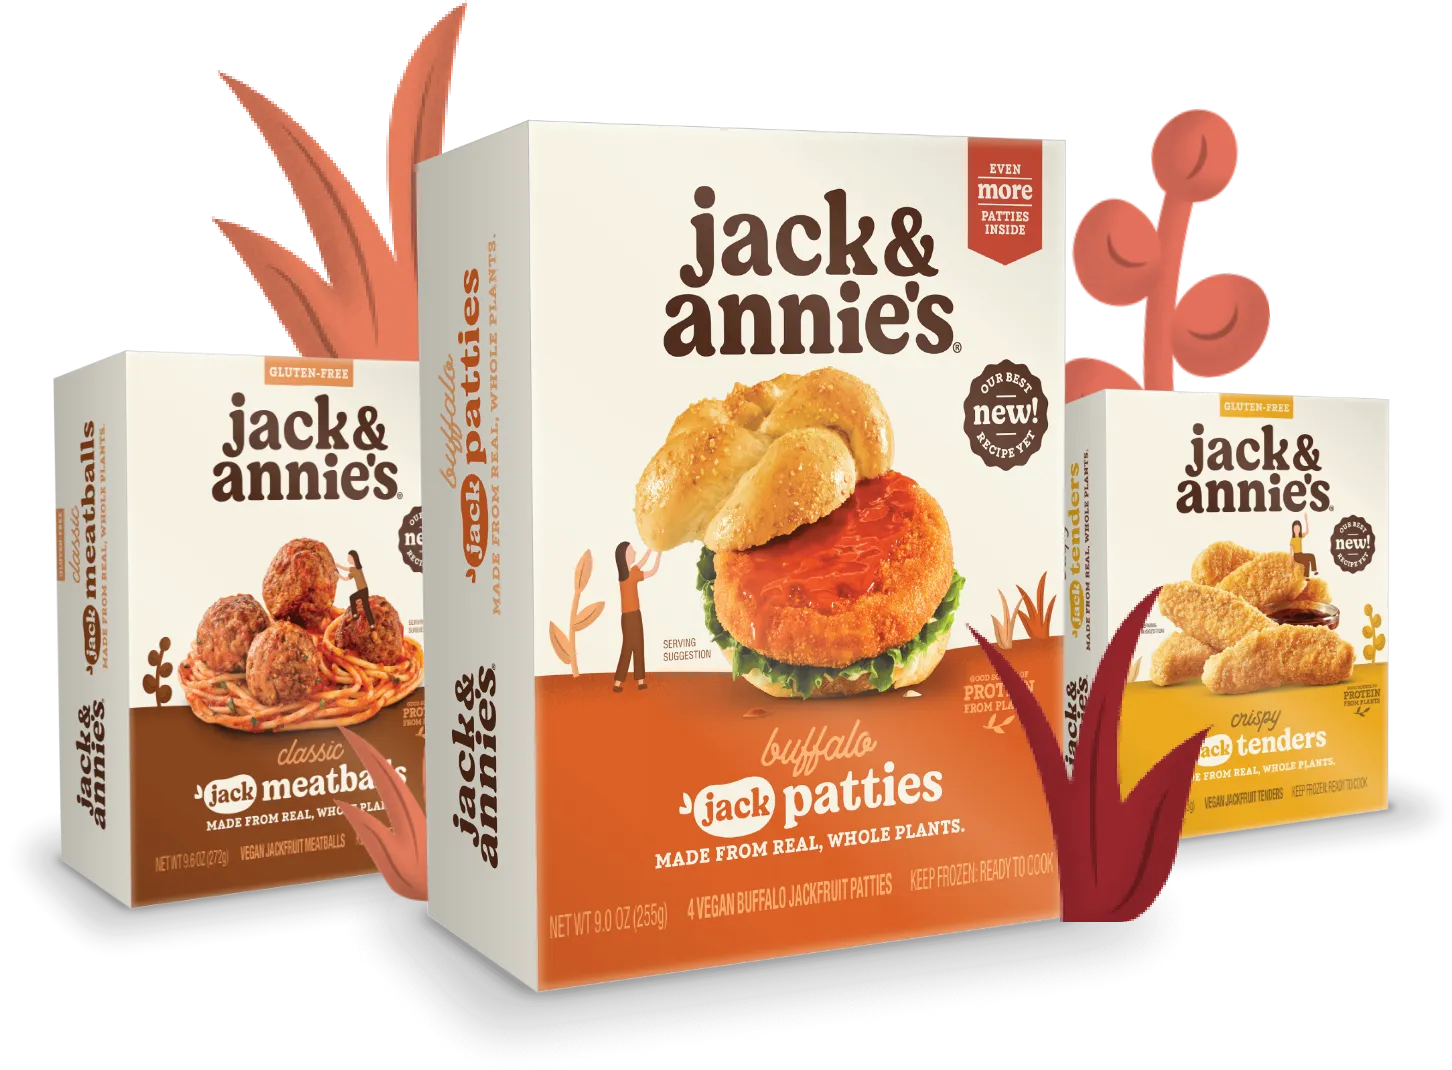 jack & annie's products